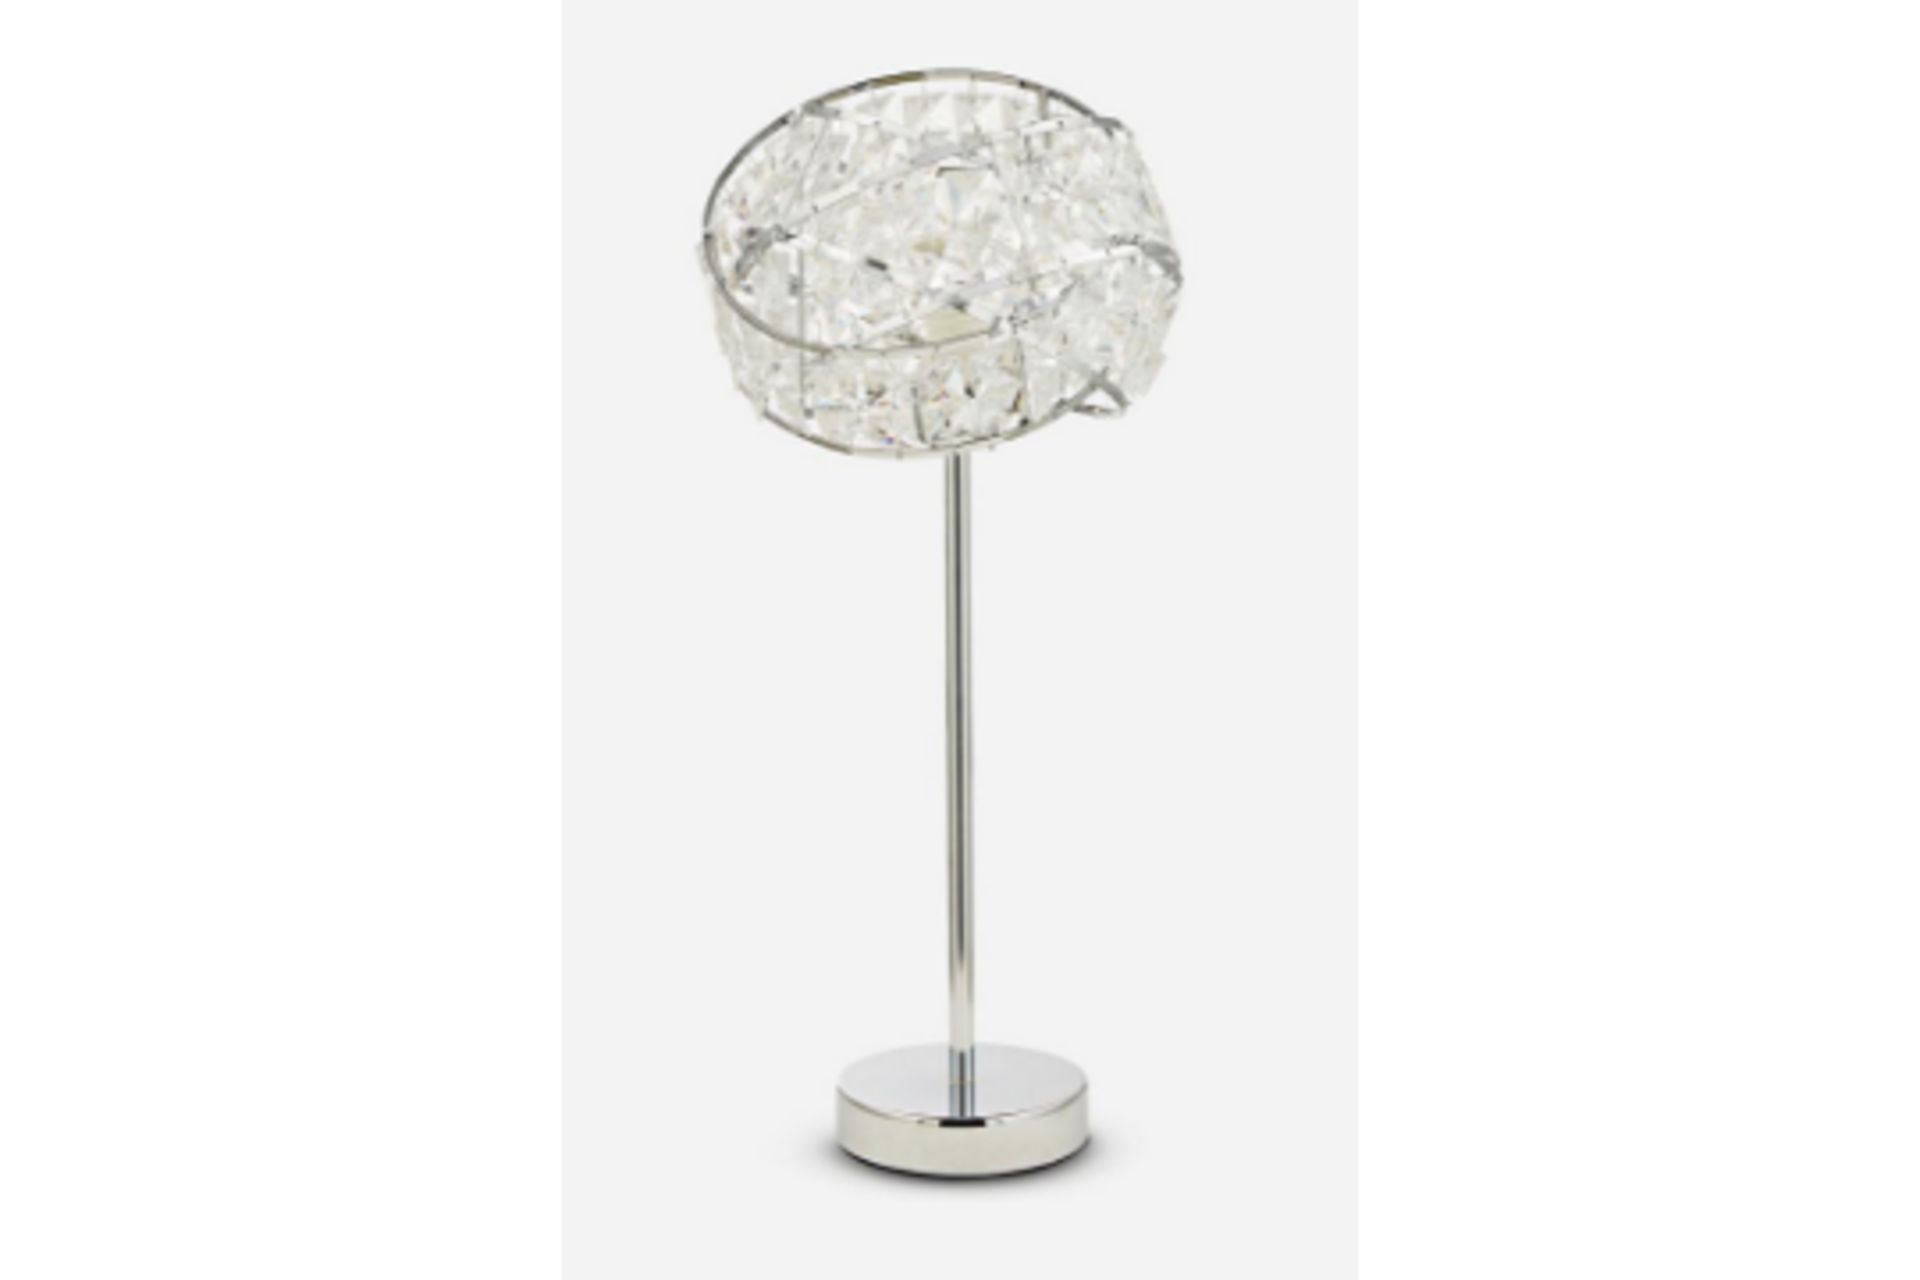 Twist Acrylic Table Lamp - (R51) . A modern twist acrylic shade brings this chrome table lamp to